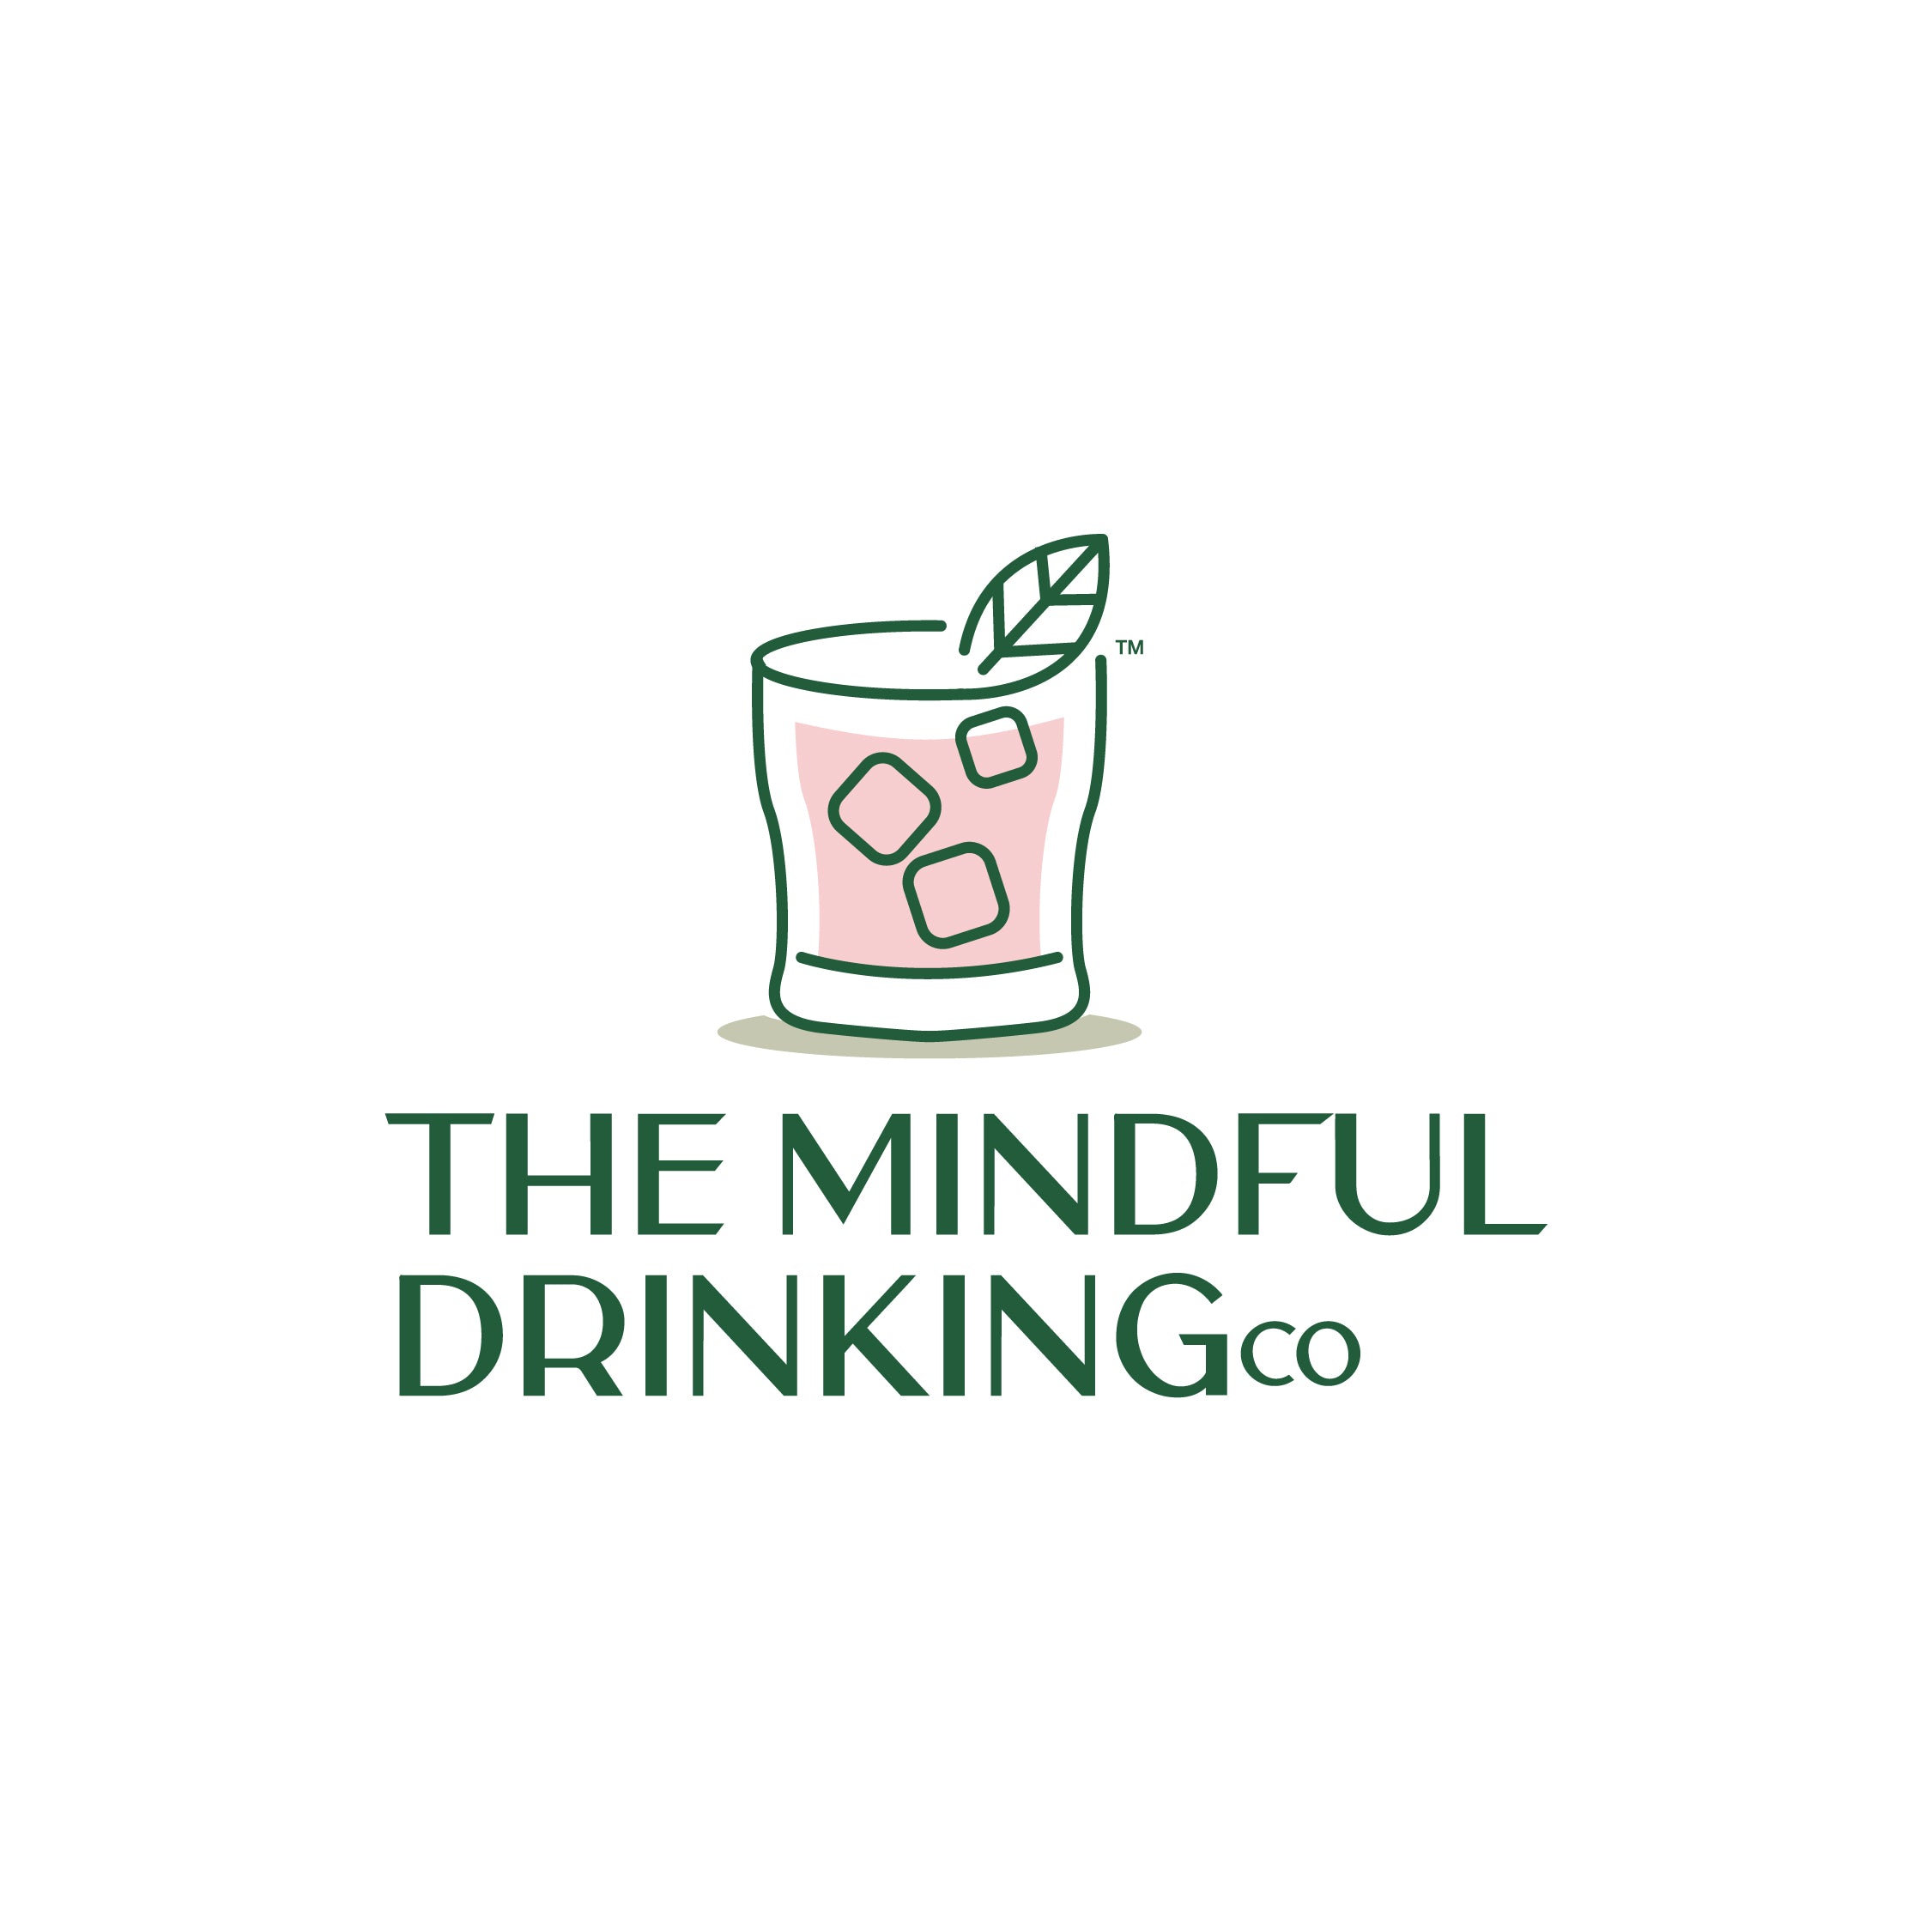 The Mindful Drinking Co